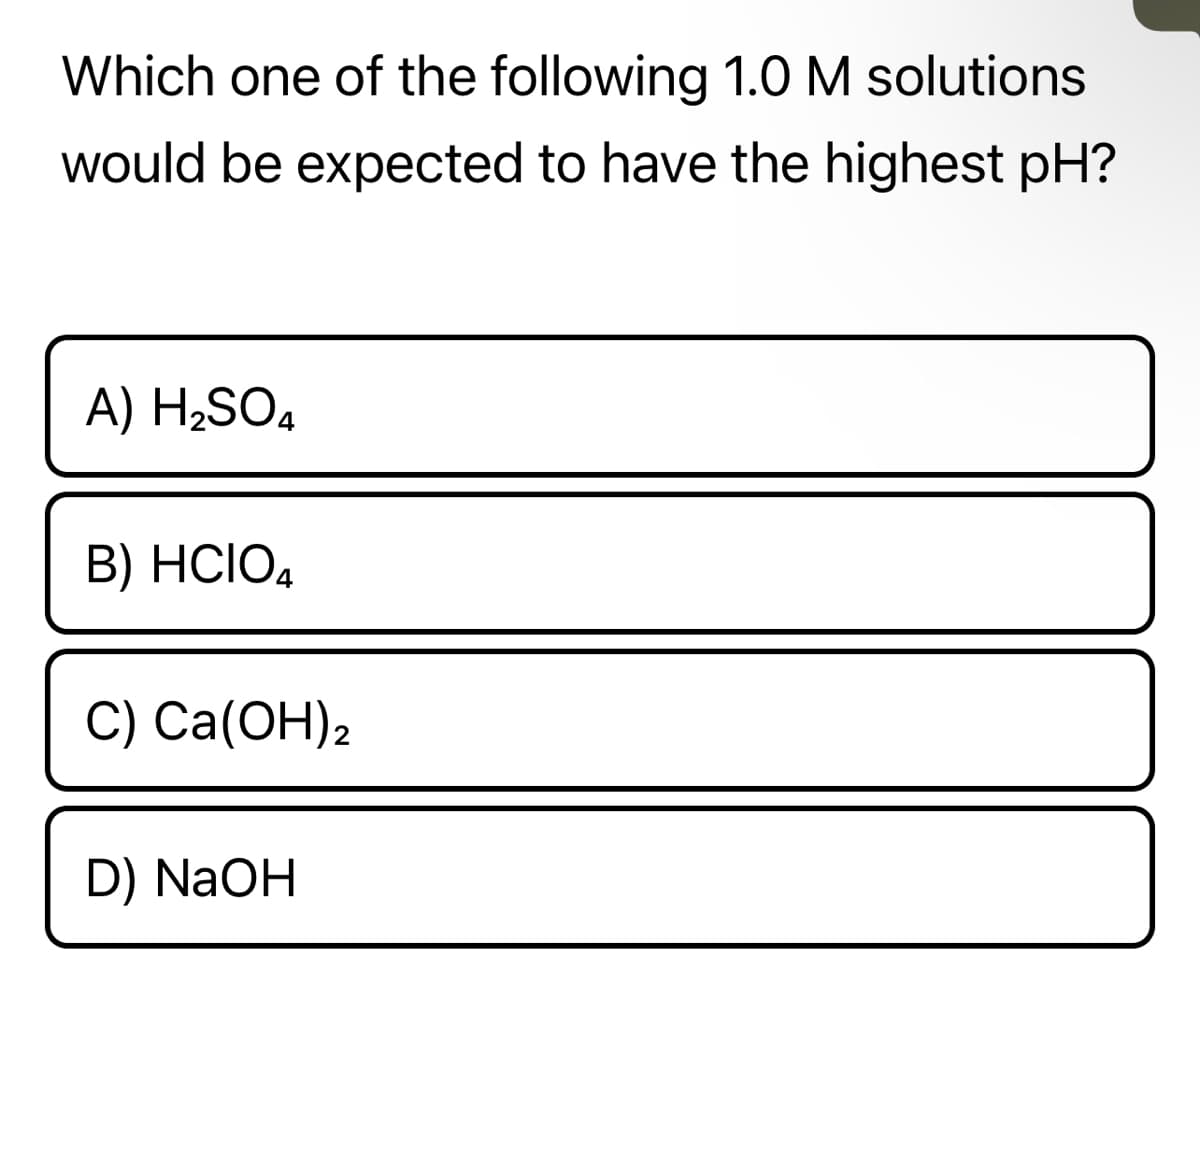 Which one of the following 1.0 M solutions
would be expected to have the highest pH?
A) H₂SO4
B) HCIO4
C) Ca(OH)2
D) NaOH
In